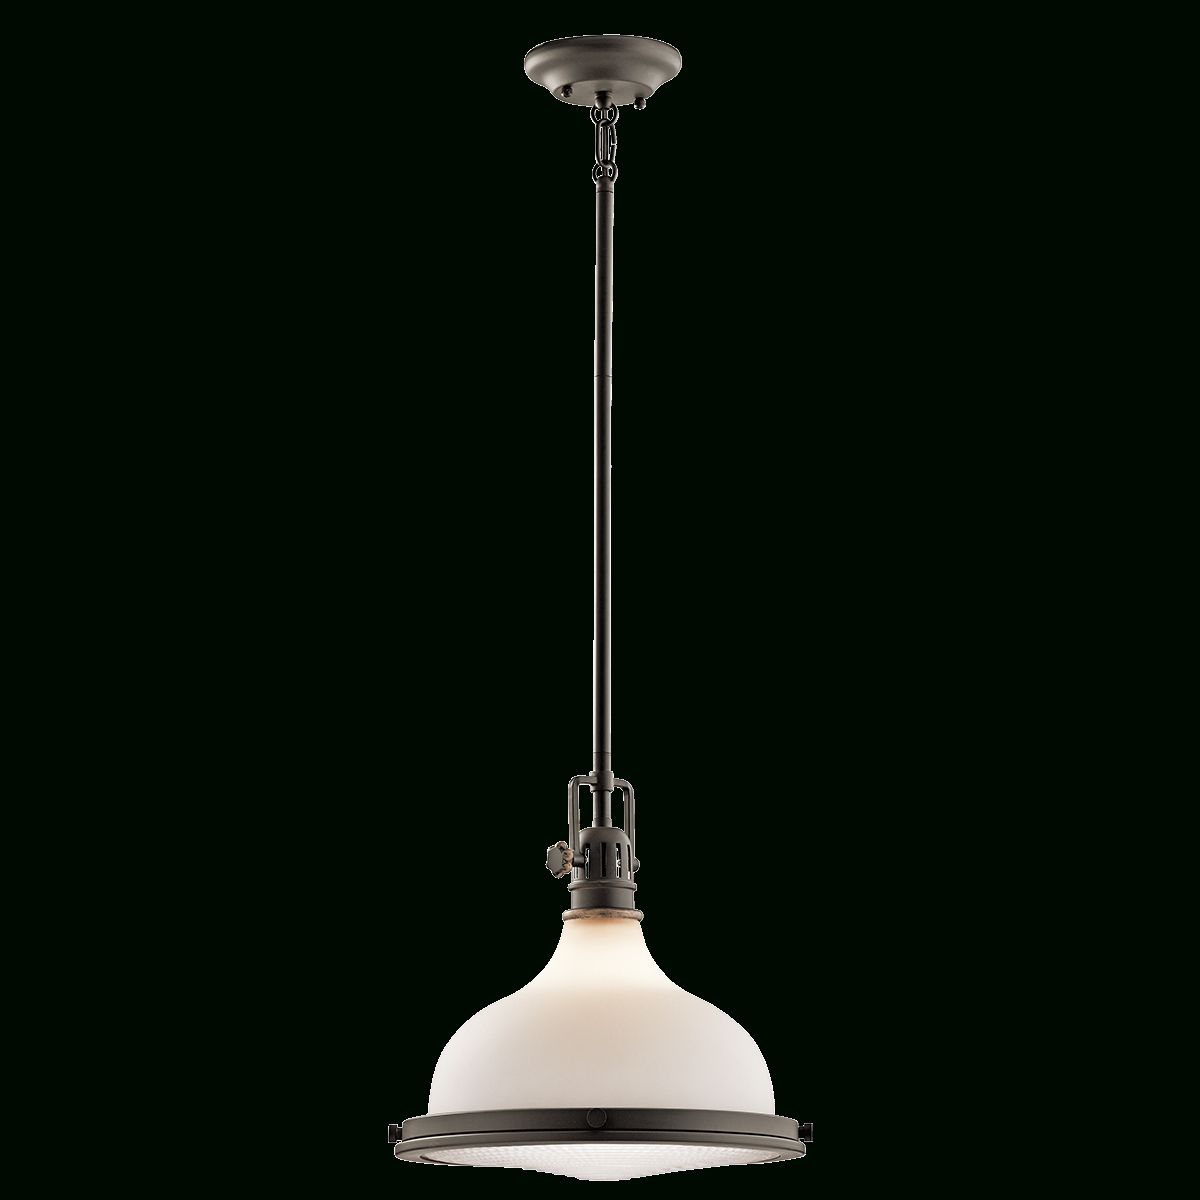 1 Light (43766oz) 13" Pendant In Olde Bronze | Hatteras Bay Pertaining To Macon 1 Light Single Dome Pendants (View 7 of 30)